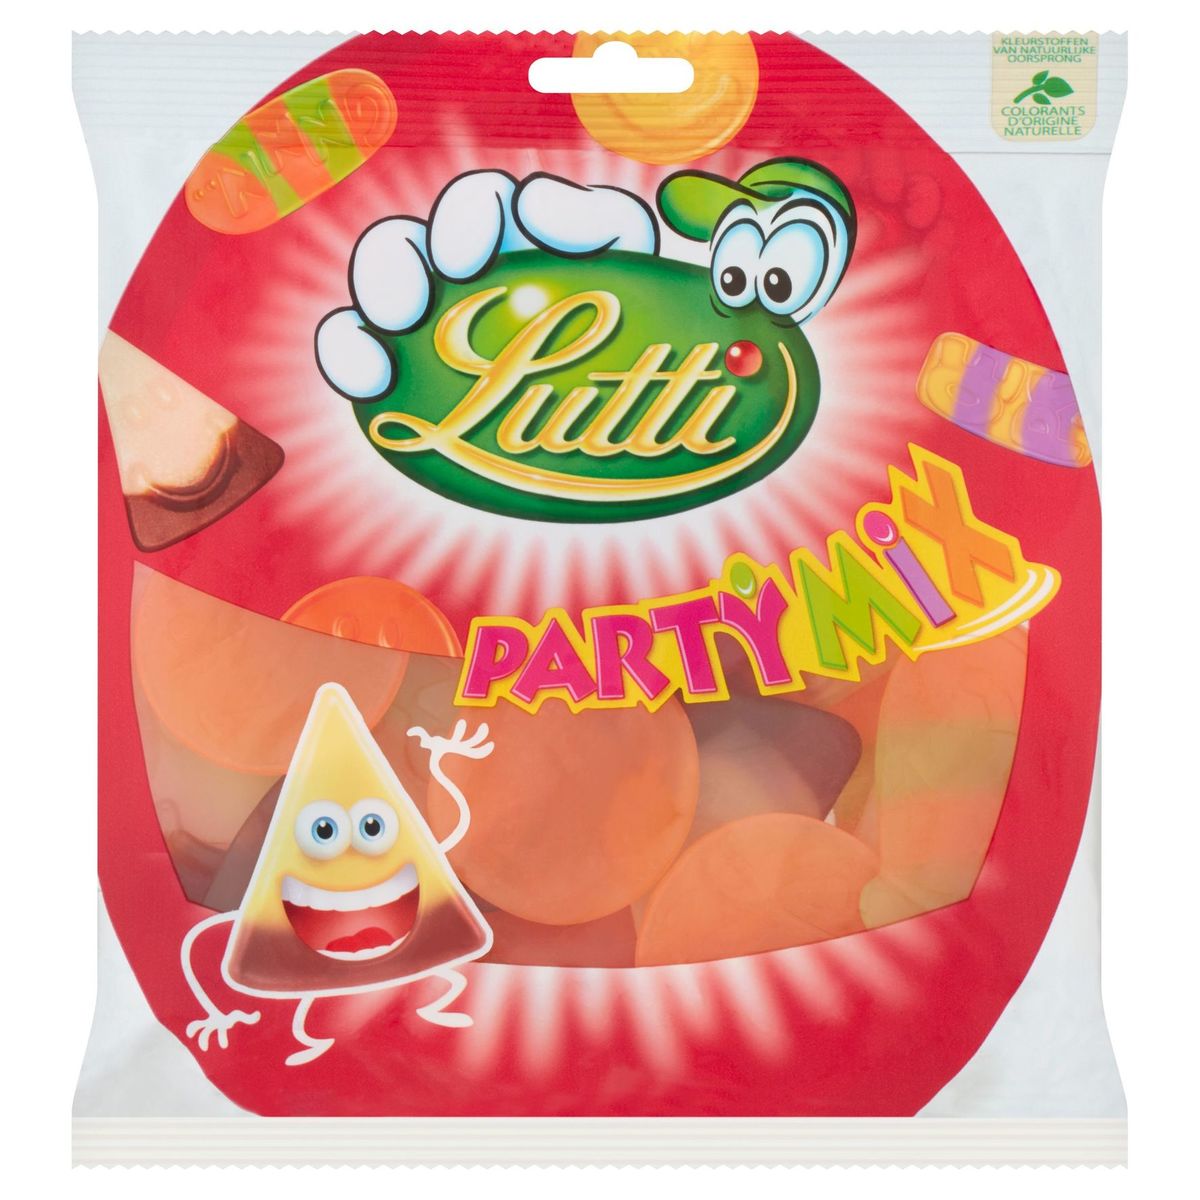 Lutti Party Mix 315 g